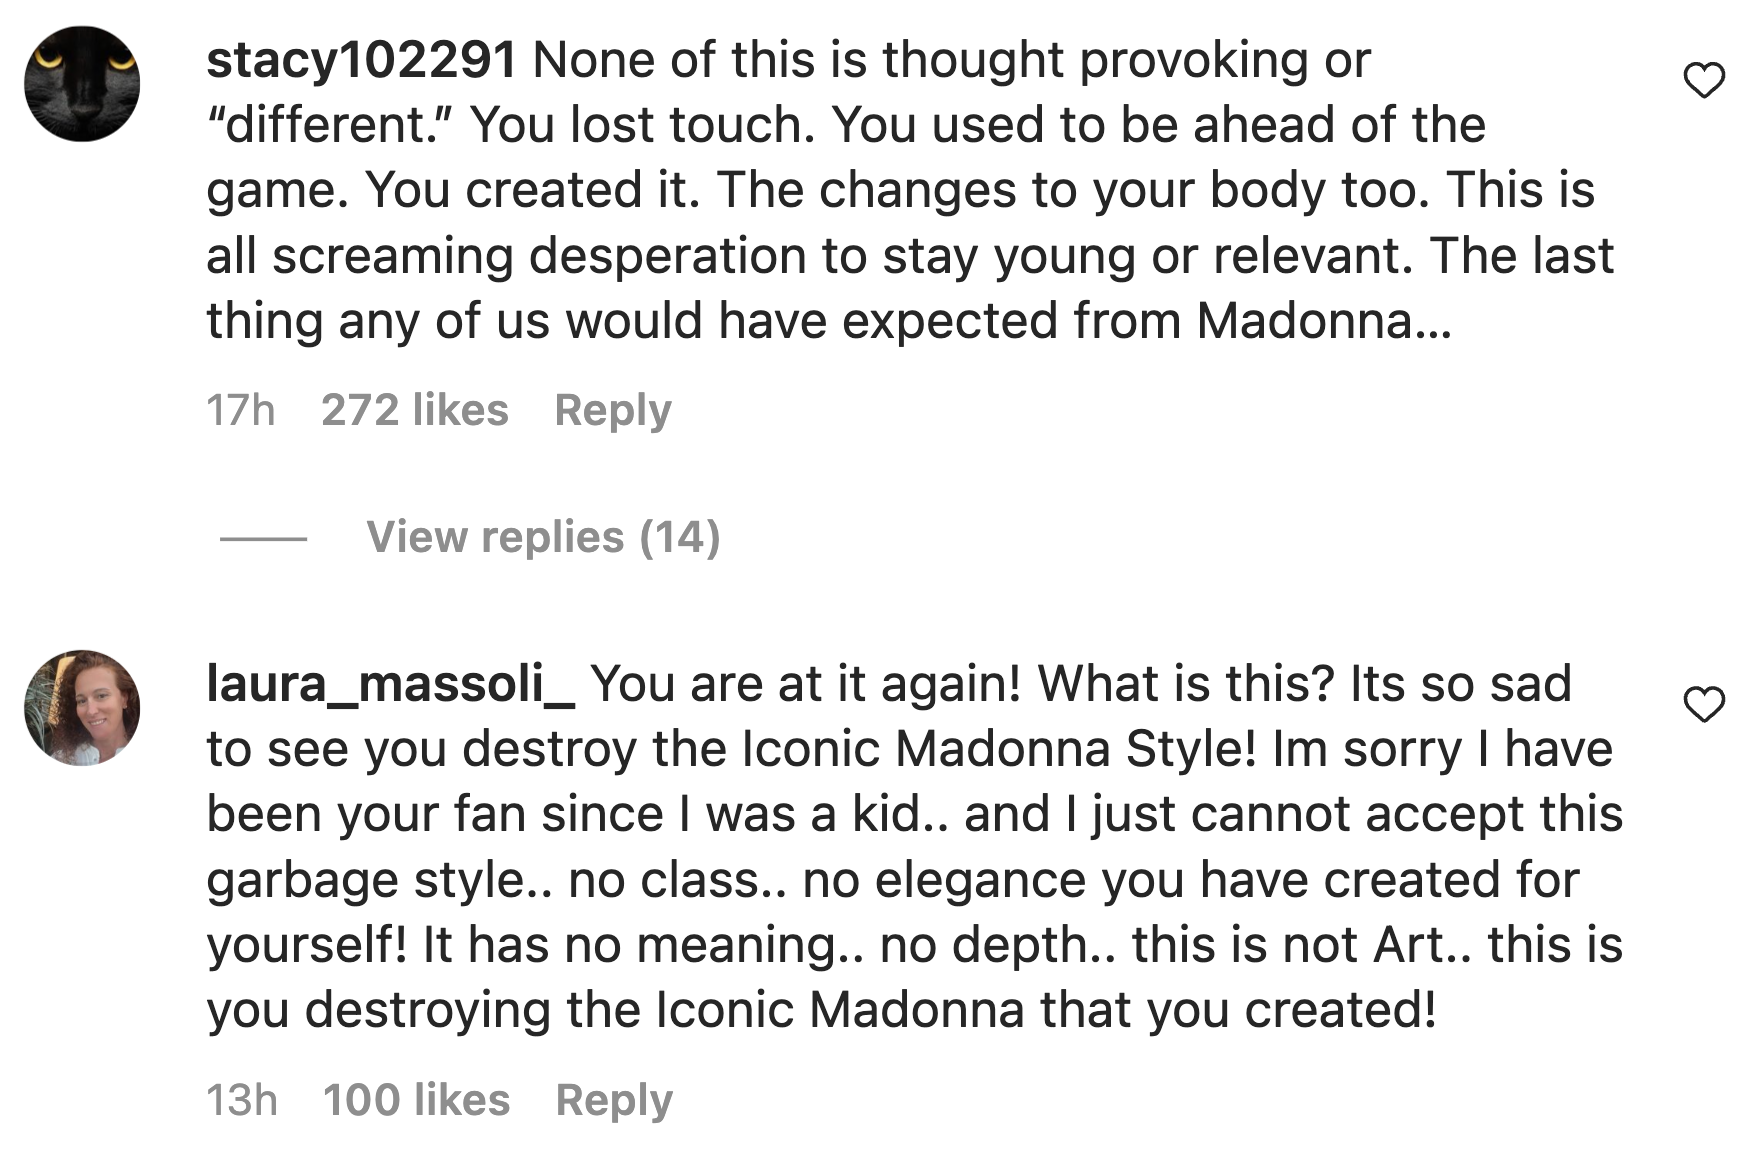 Critics come at Madonna for mimicking a dog